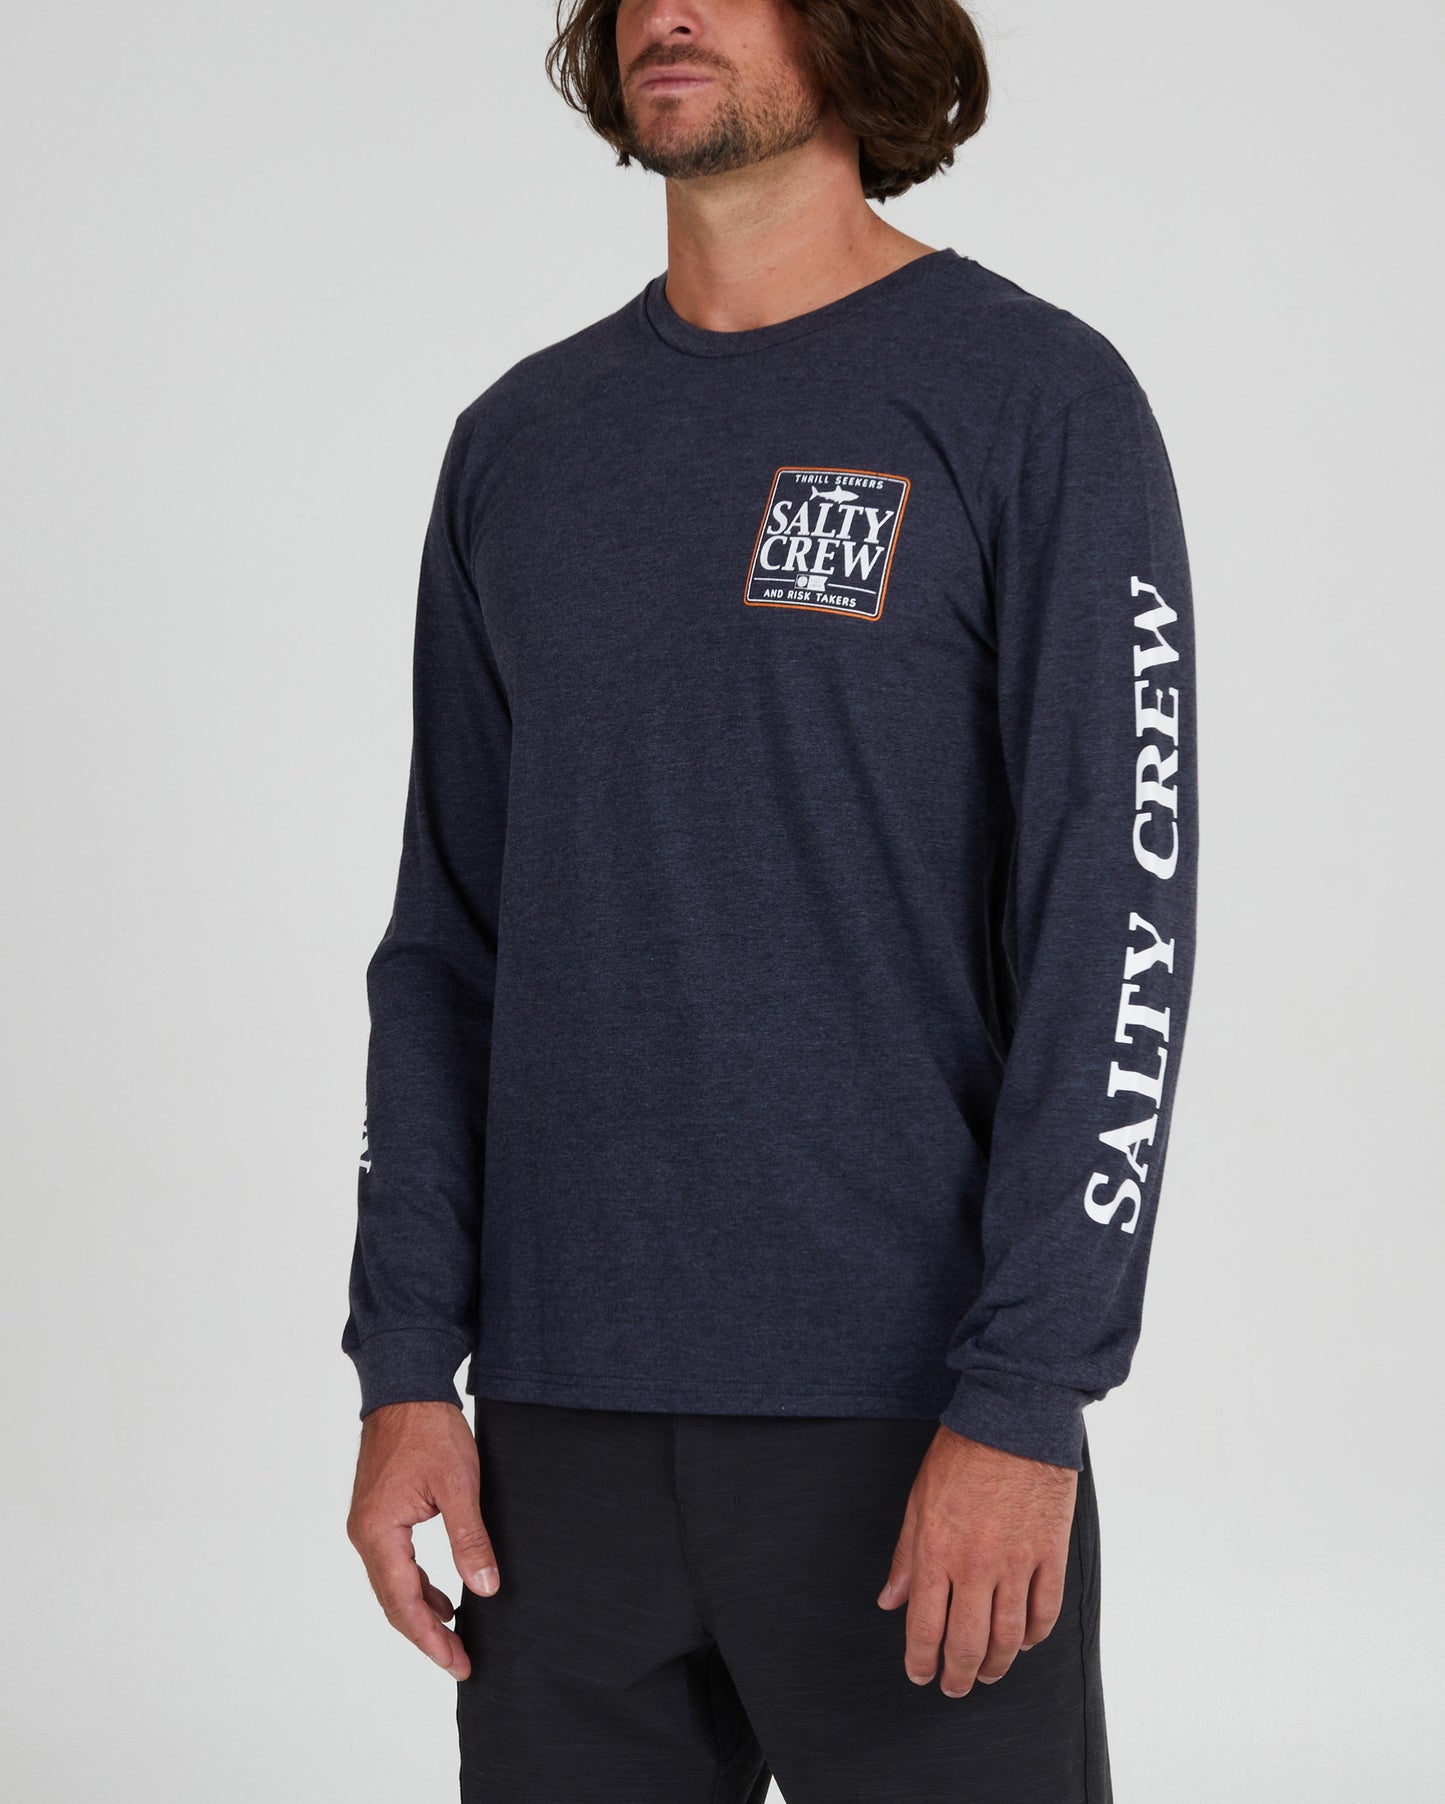 On body front angle of the Coaster Navy Heather L/S Premium Tee